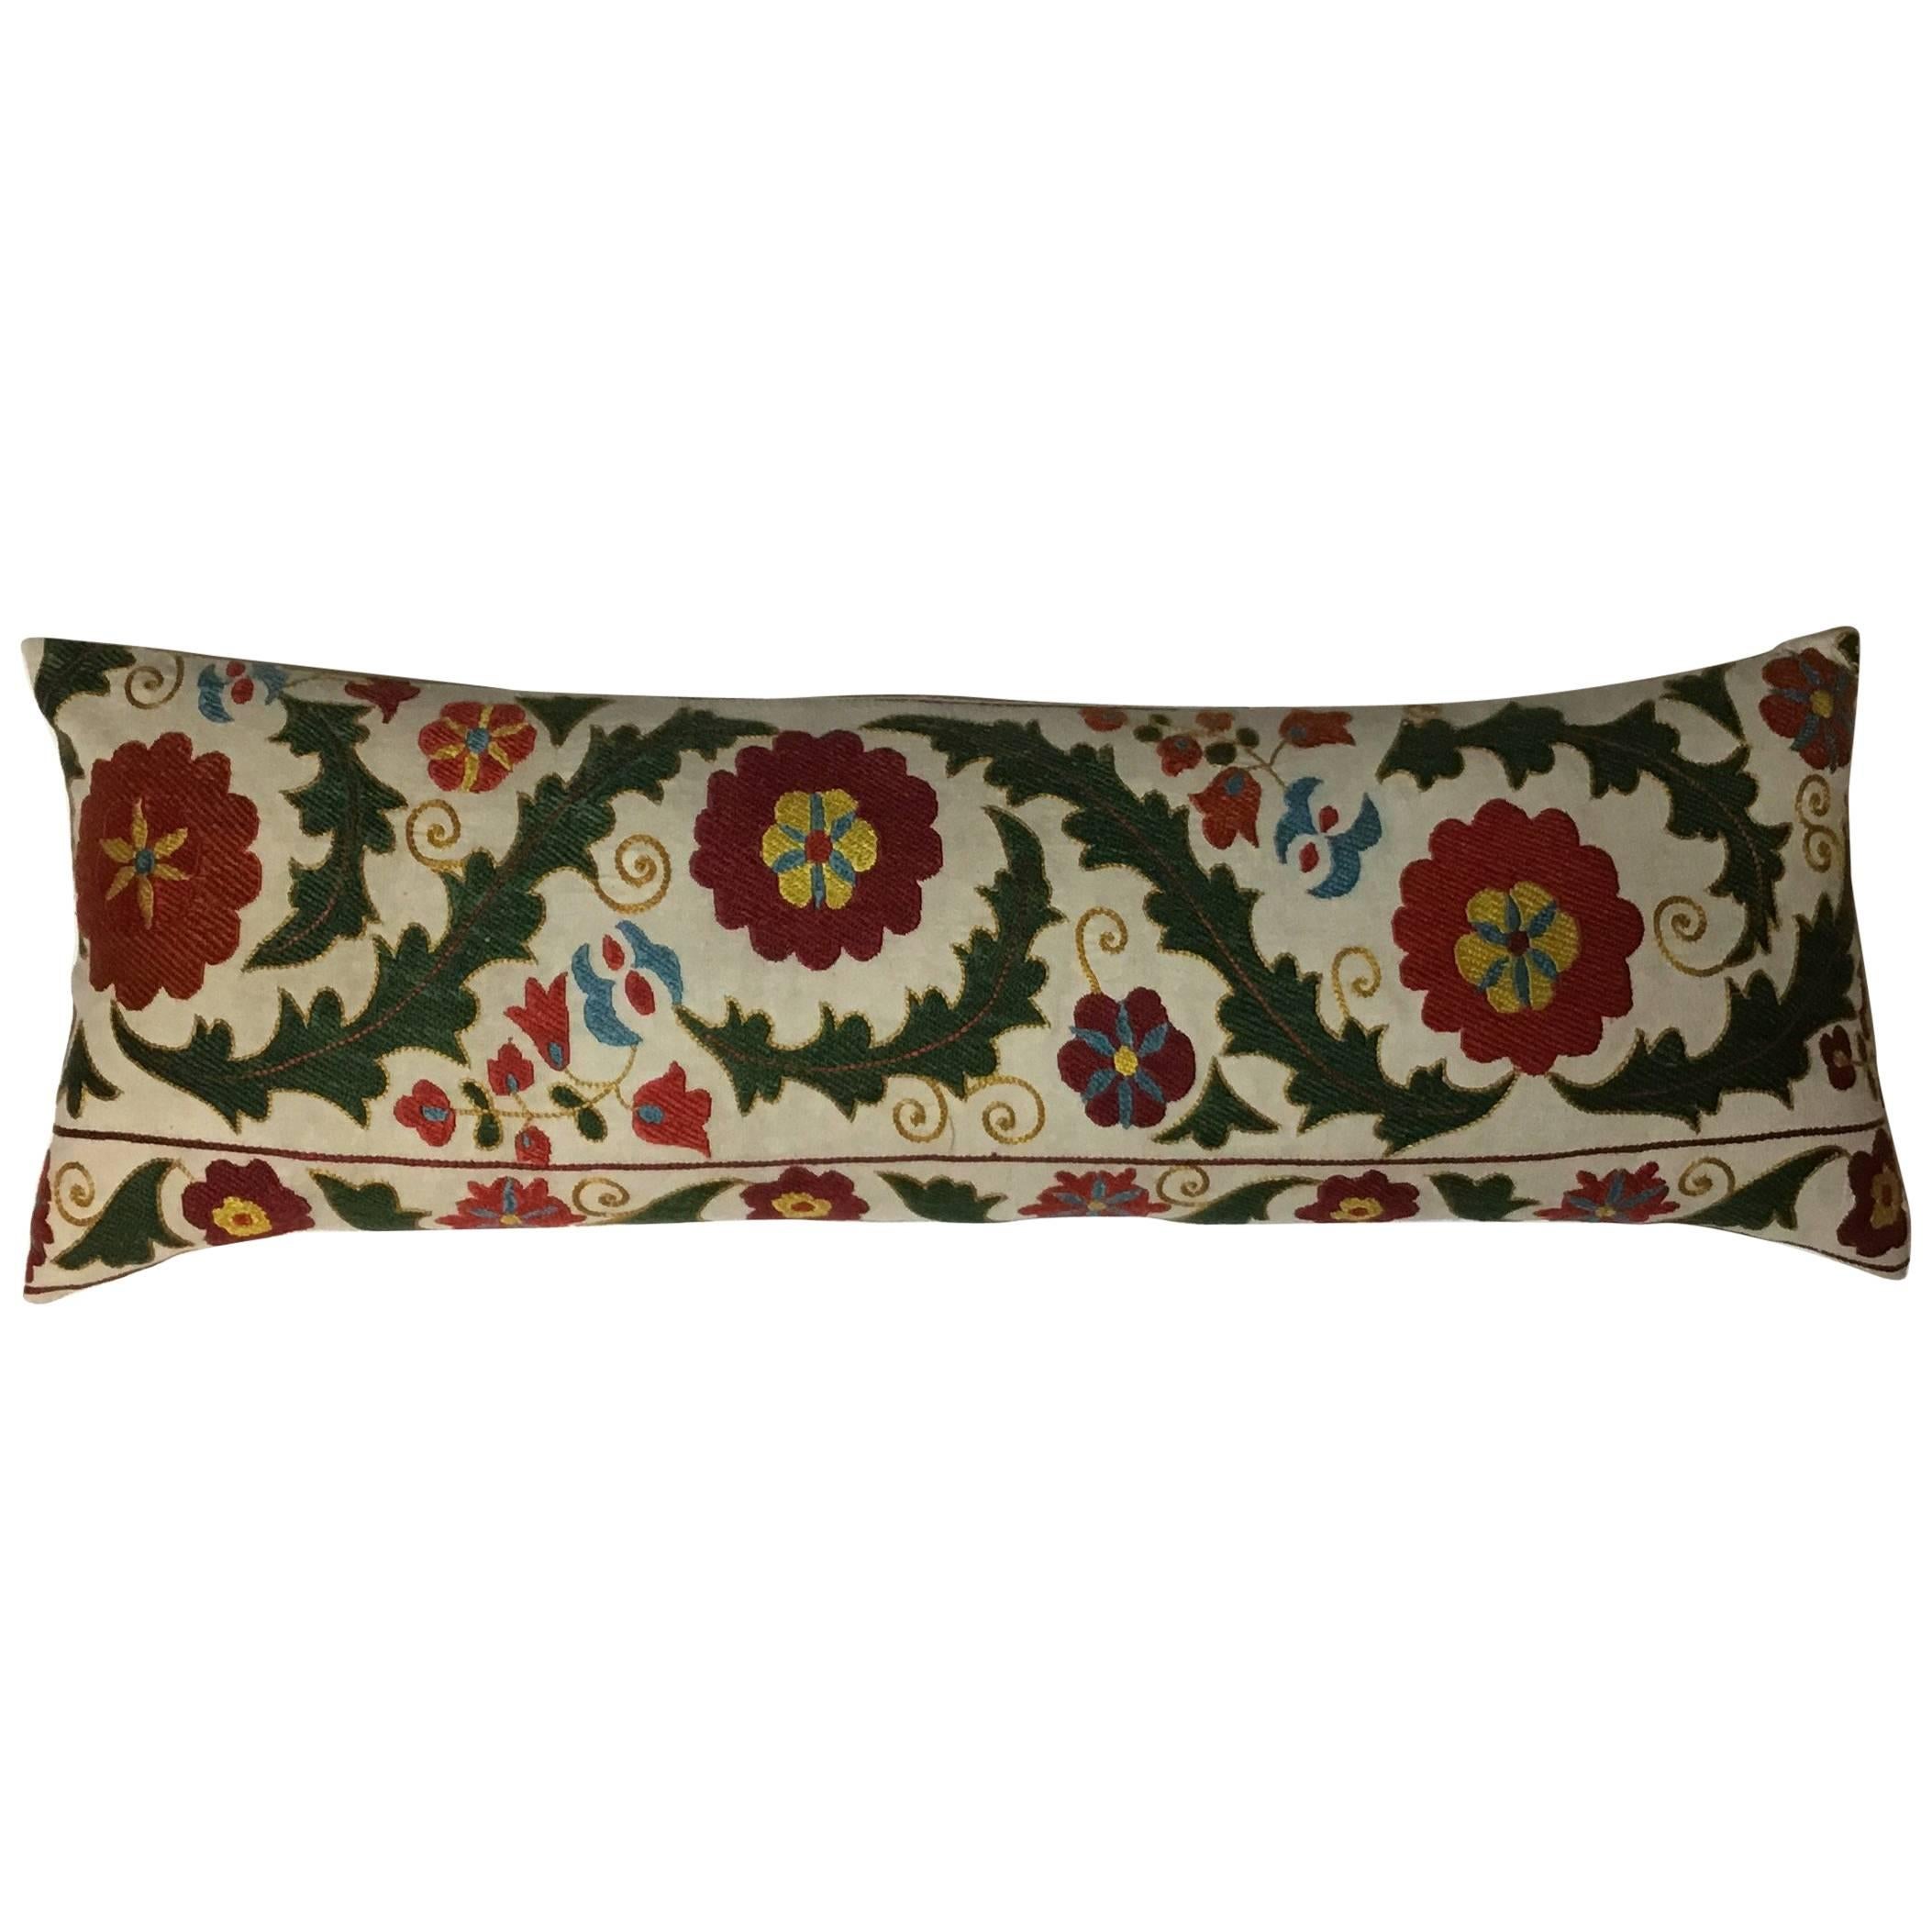 Hand Embroidery Suzani Pillow